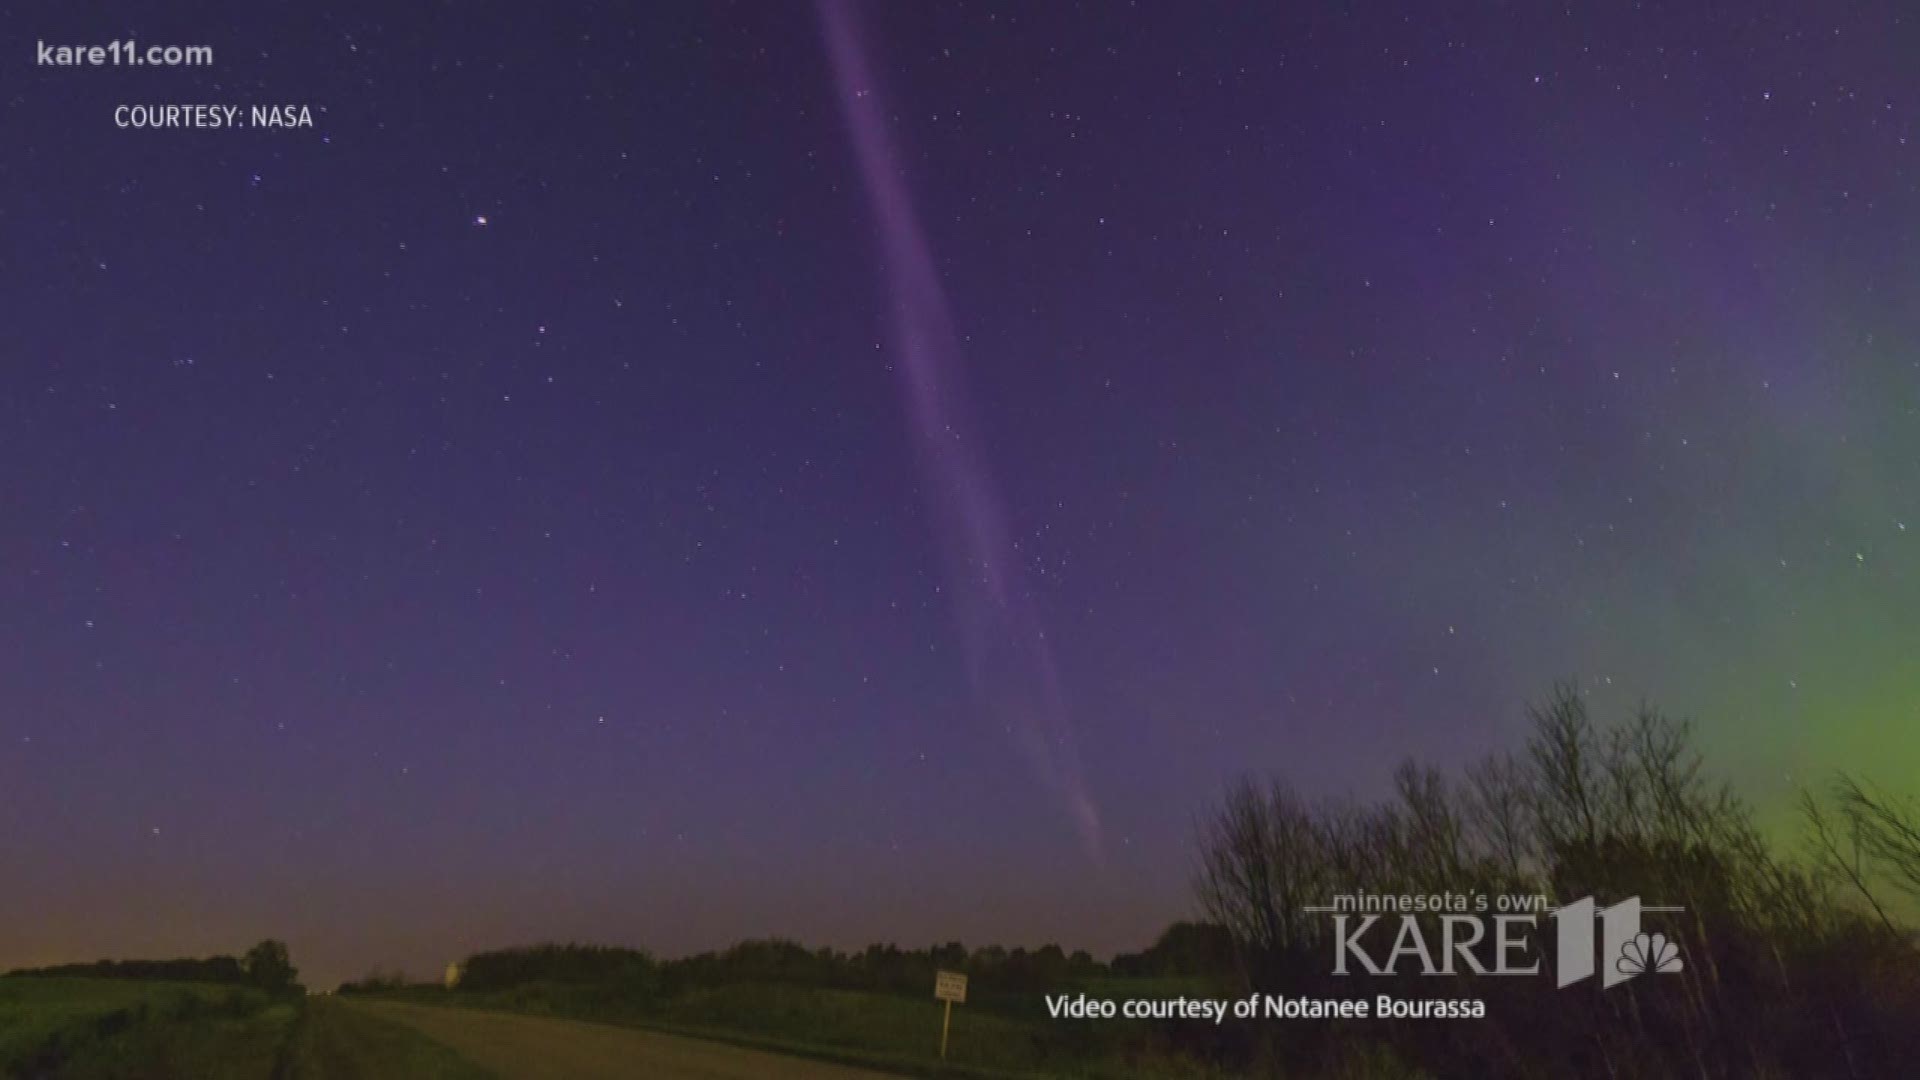 Meet STEVE: A type of northern light that has been unknown until a recent effort with citizen scientists and satellite observations helped us understand how it forms. http://kare11.tv/2DL9nvd